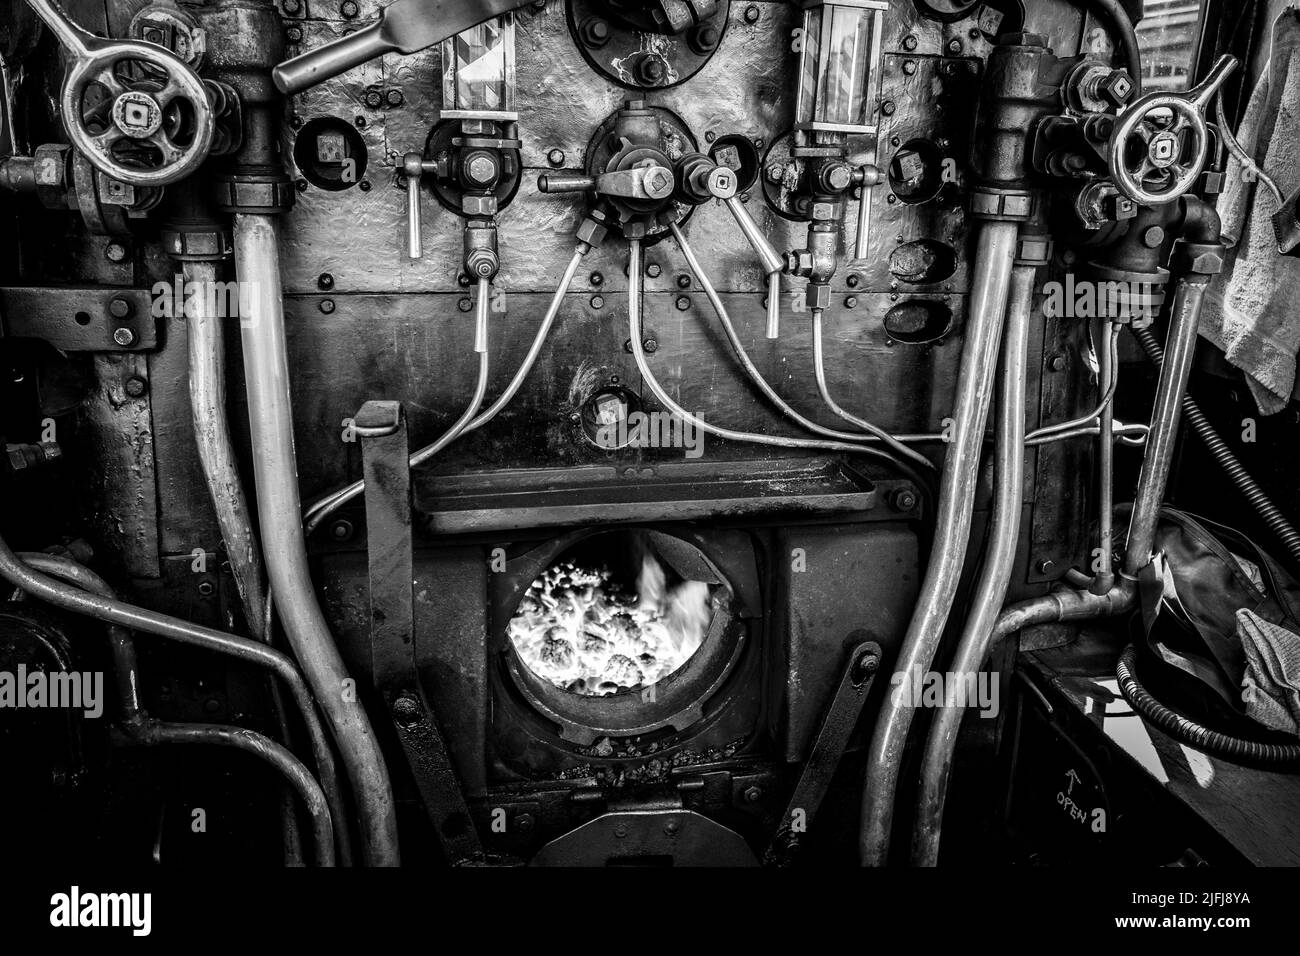 Fire box and main boiler control valves of the Class 7F 2-8-0 No 53809 locomotive steam train at Holt station, Norfolk, England. Stock Photo